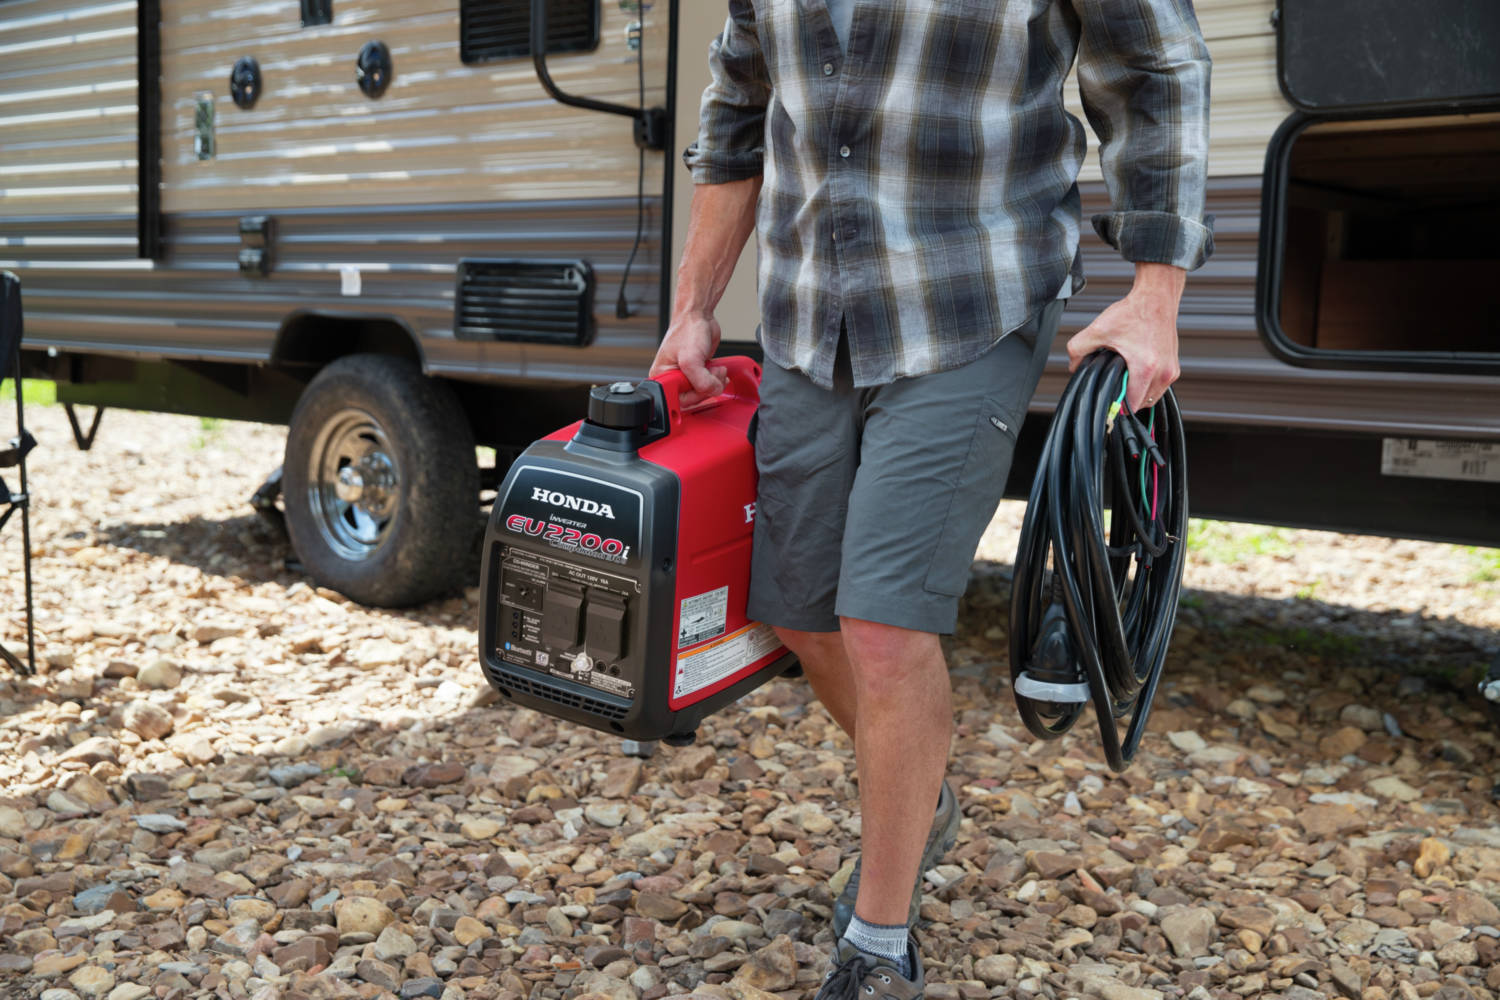 The EU2200i is lightweight and compact making it easy to transport and store